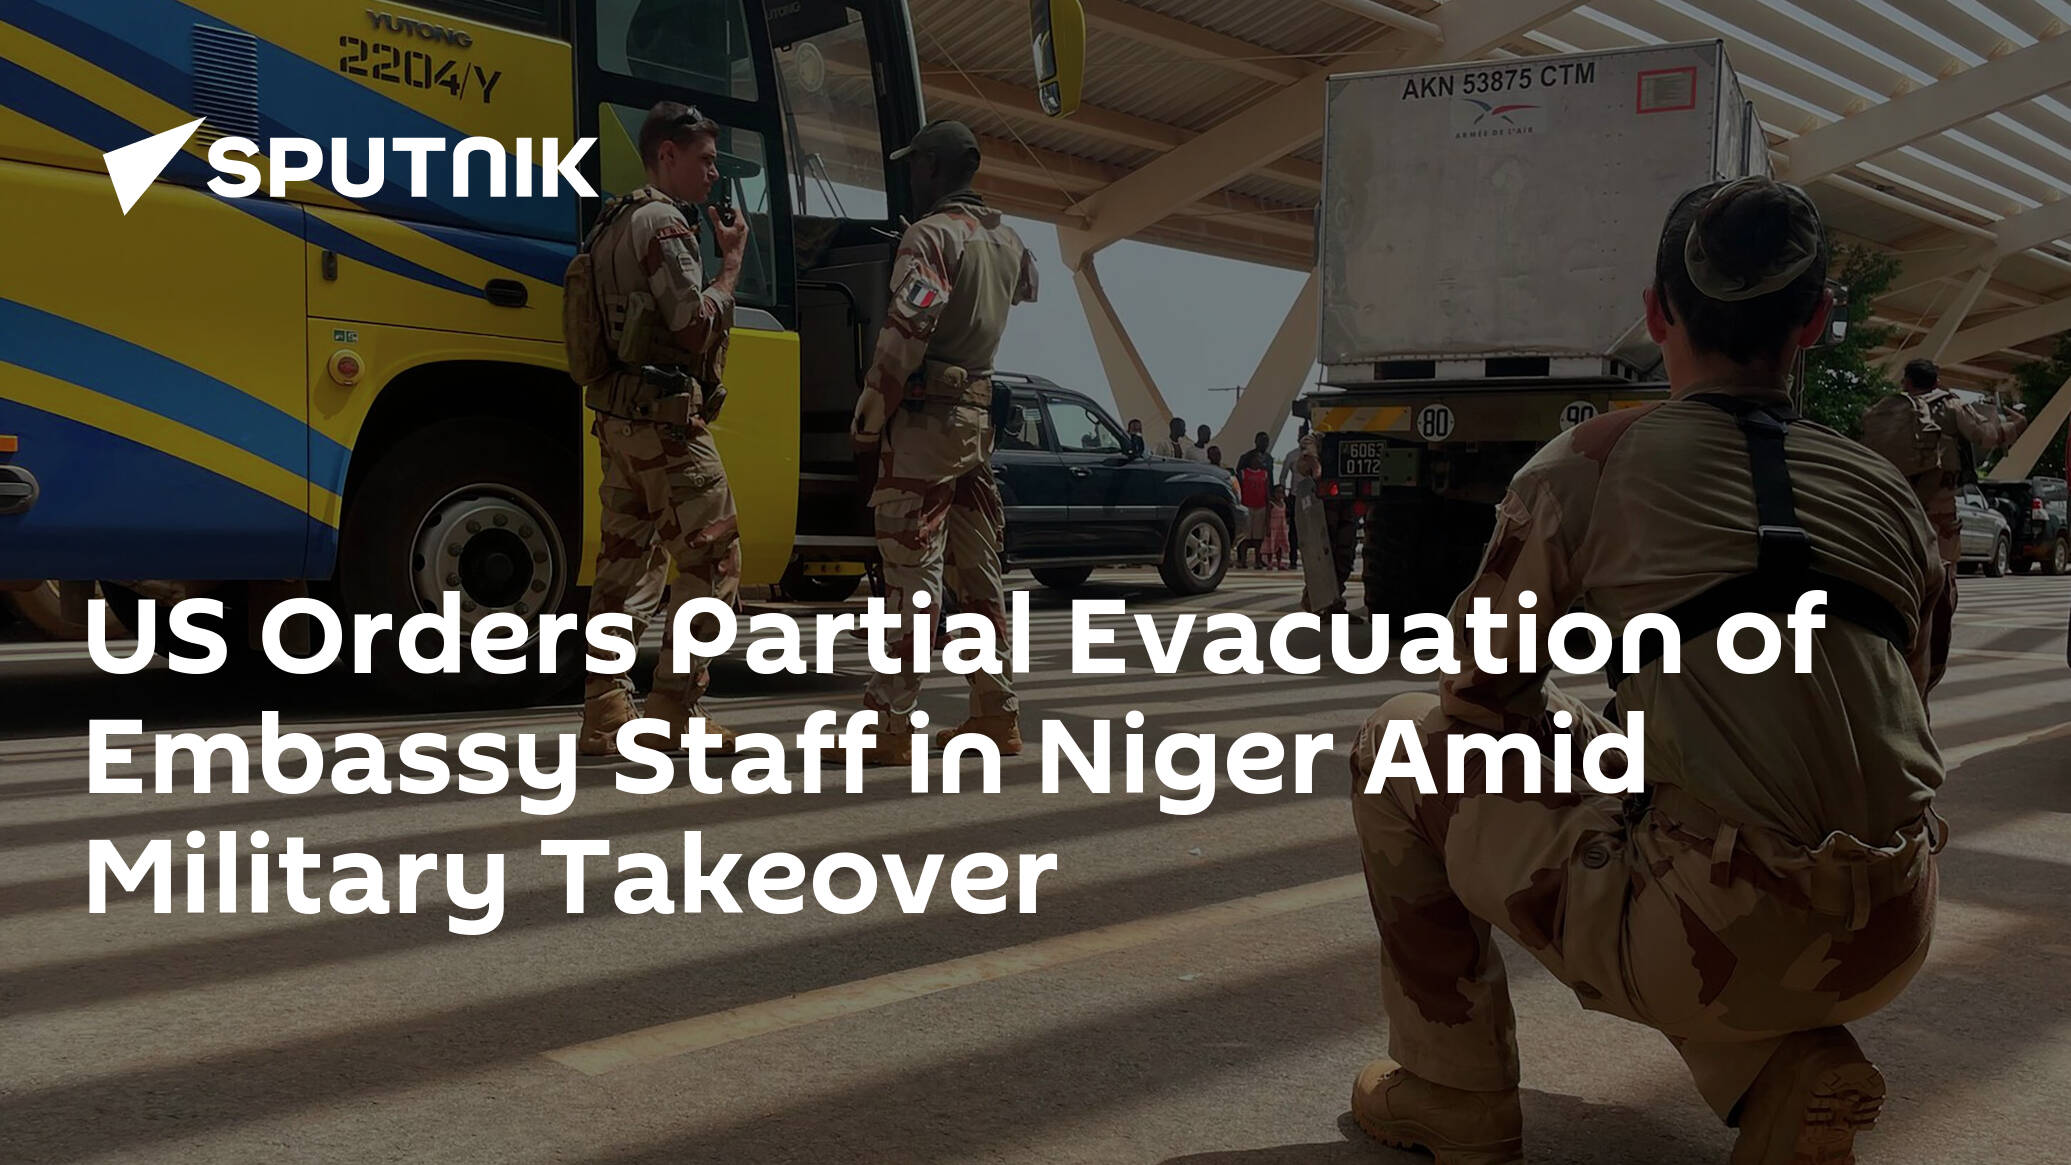 US Orders Partial Evacuation of Embassy Staff in Niger Amid Military Takeover